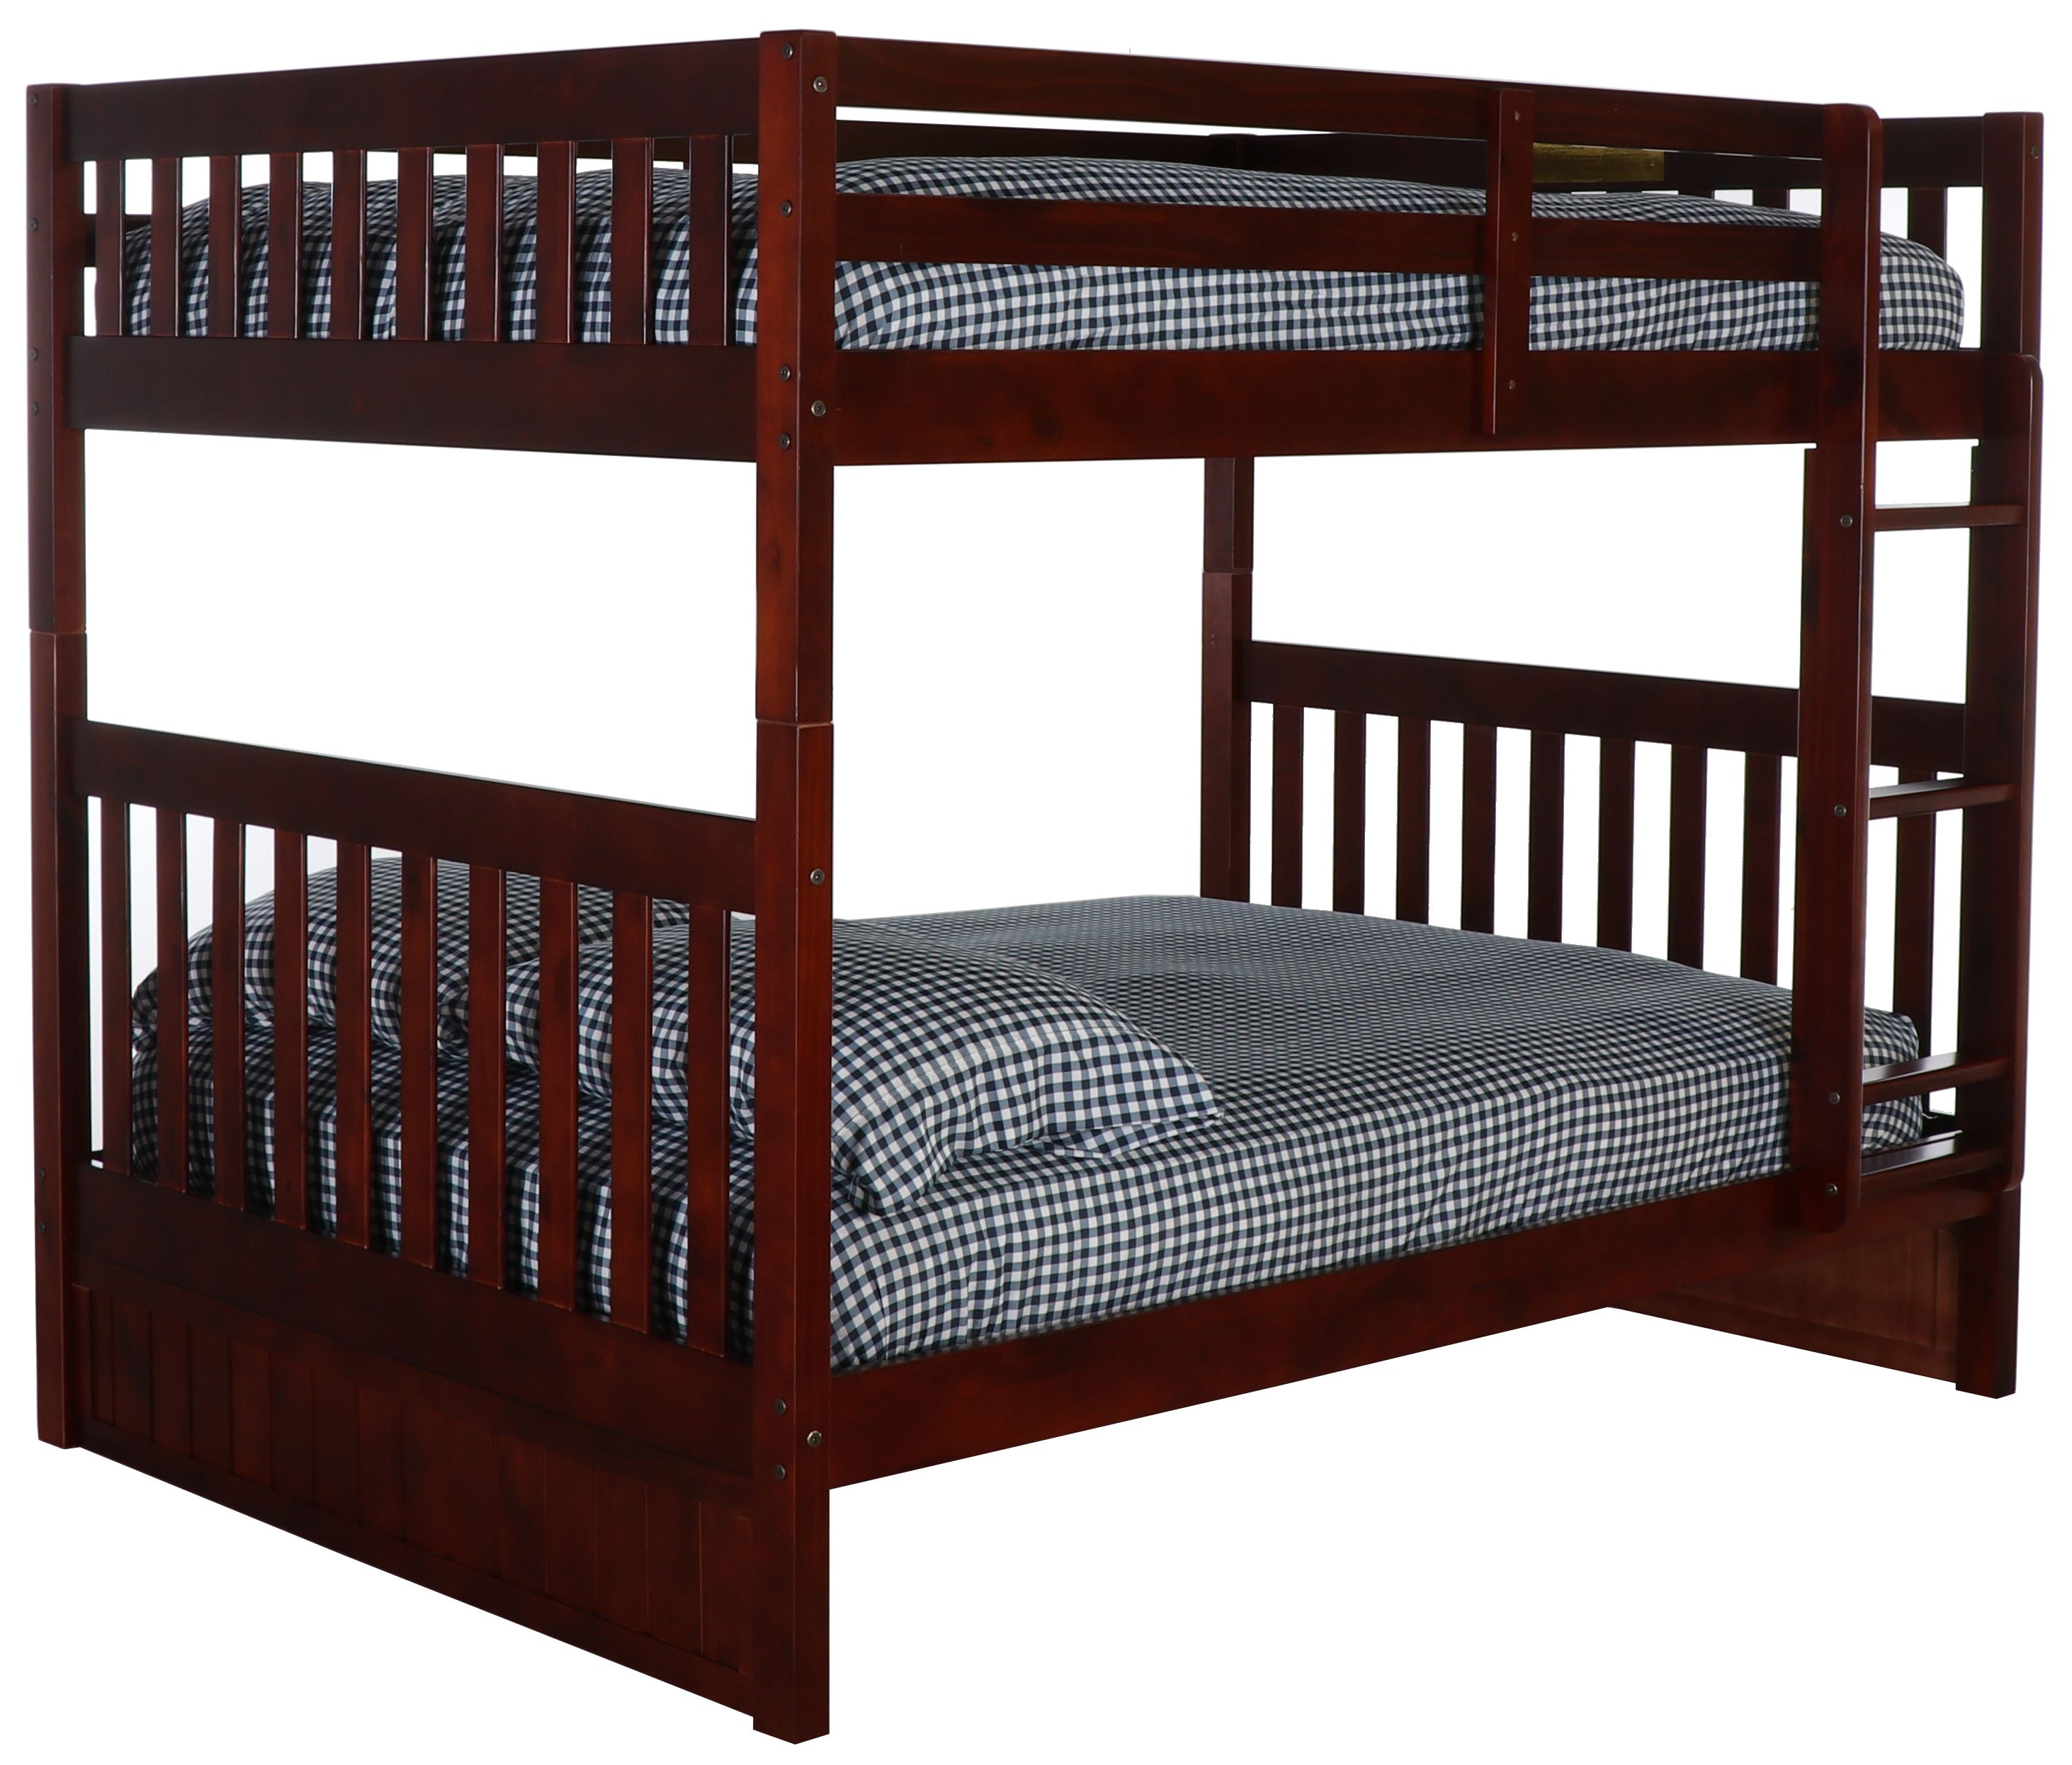 Donco Trading Company Mission Merlot Full Over Full Bunk Bed